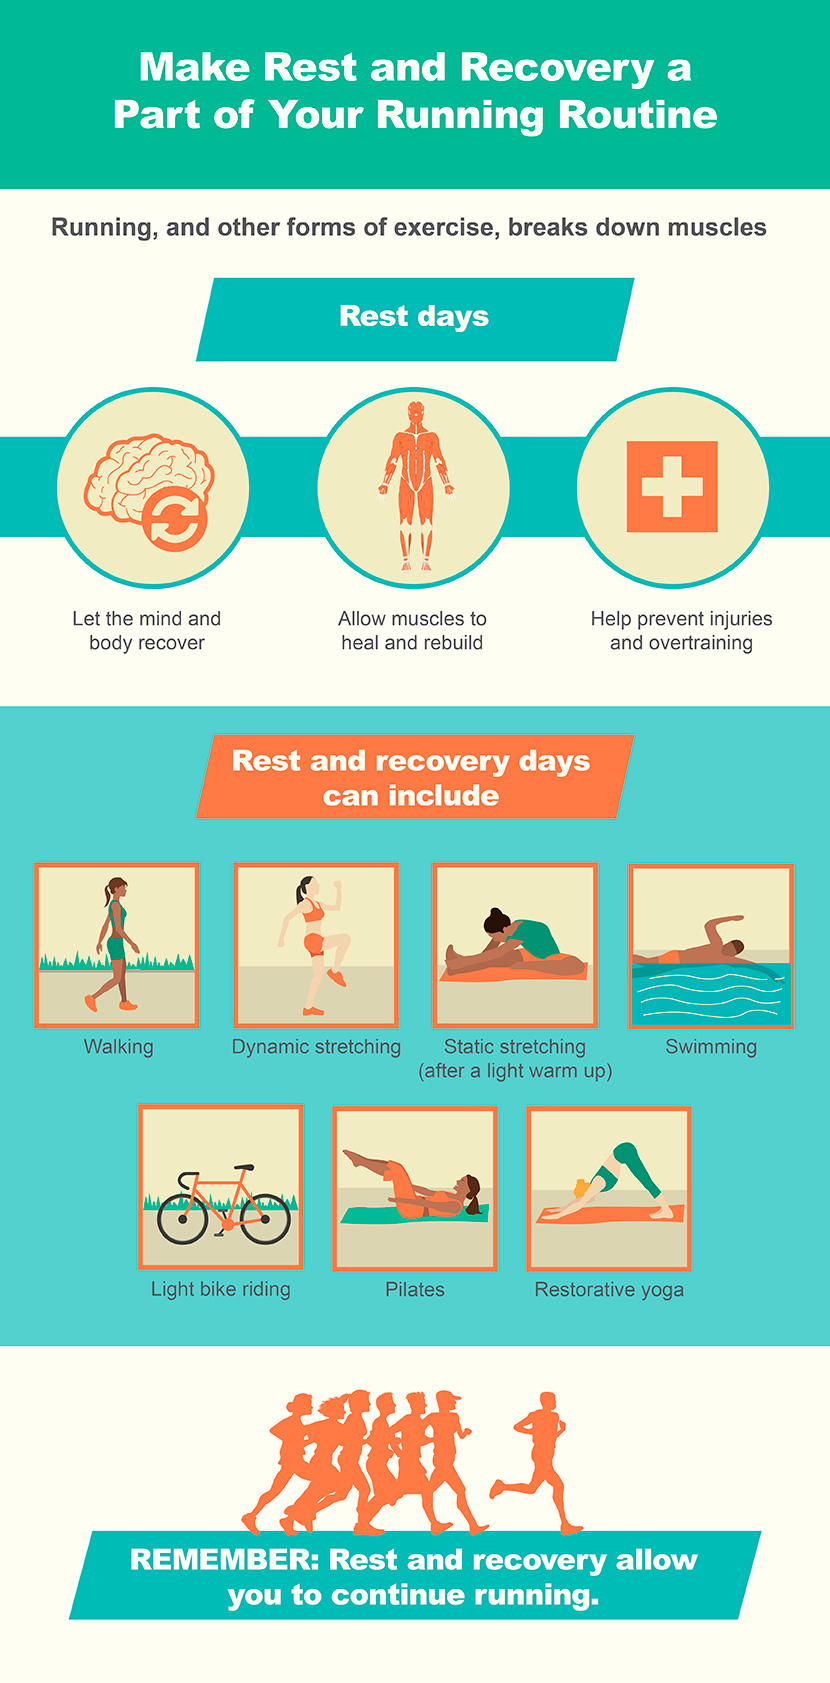 Runners Burnout: A Guide to Rest and Recovery